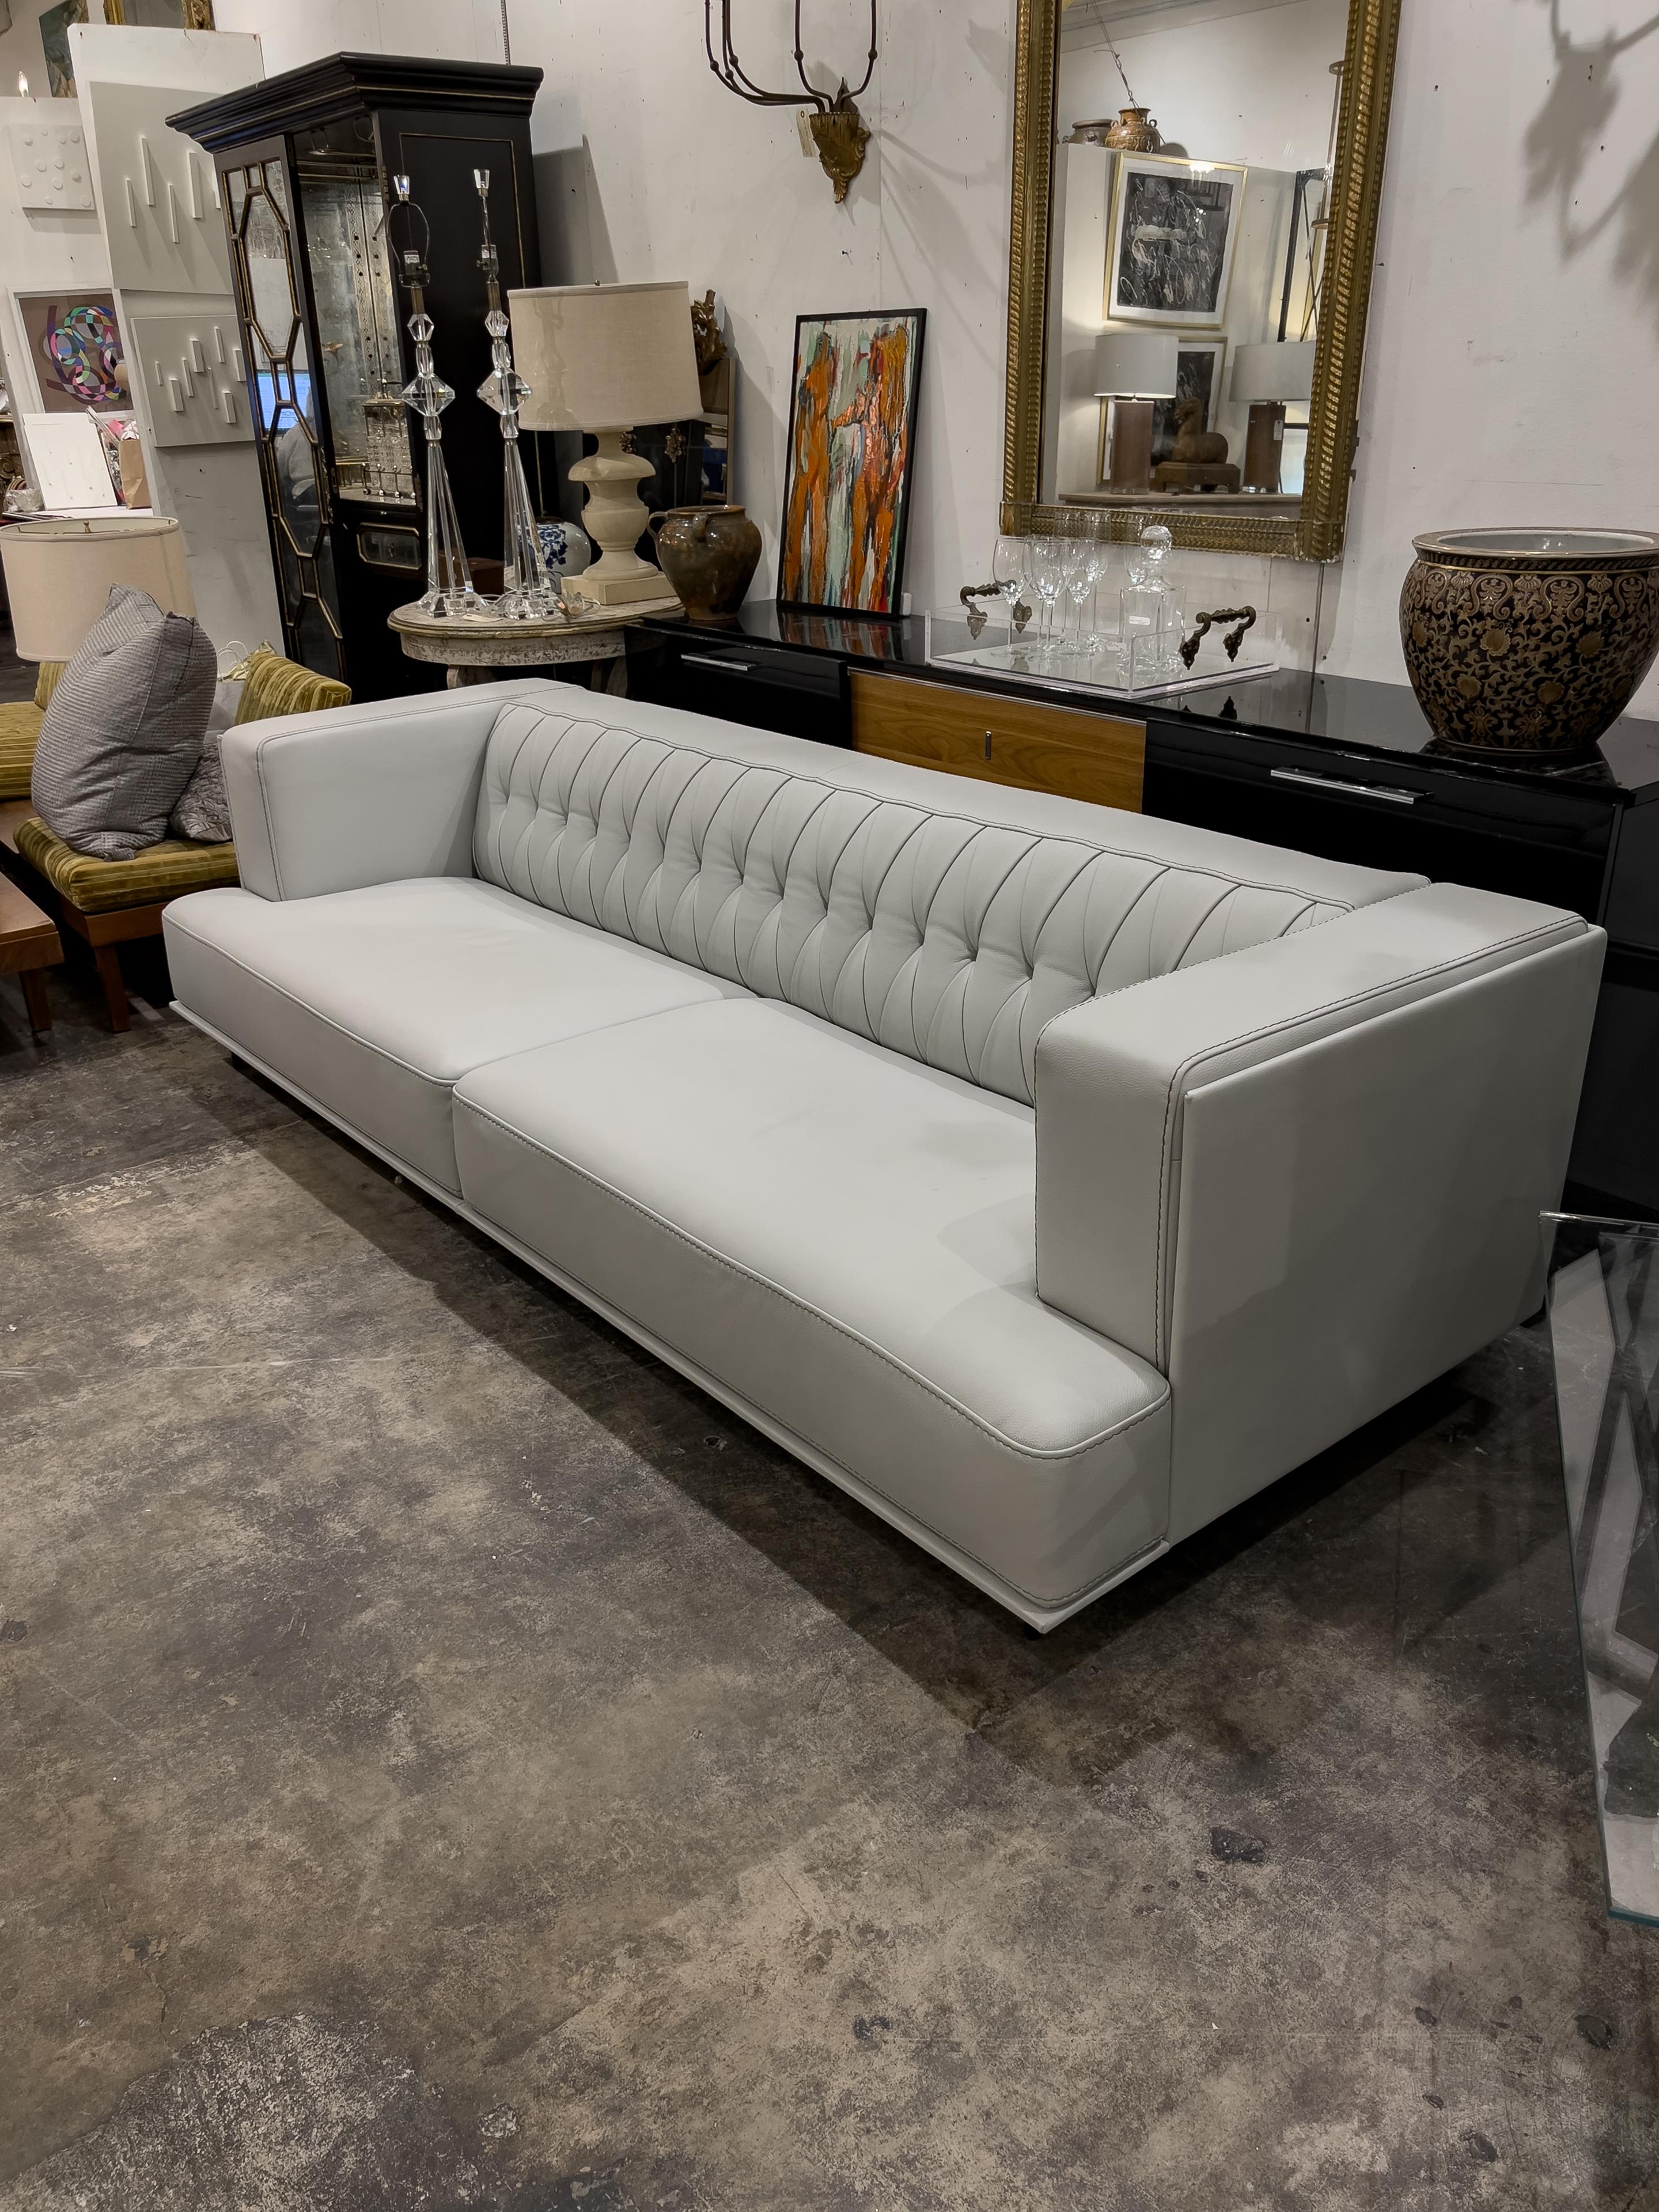 Grey Leather sofa with a tufted back, block arms, and two attached seat cushions. The couch is supported by 5 thin metal legs.